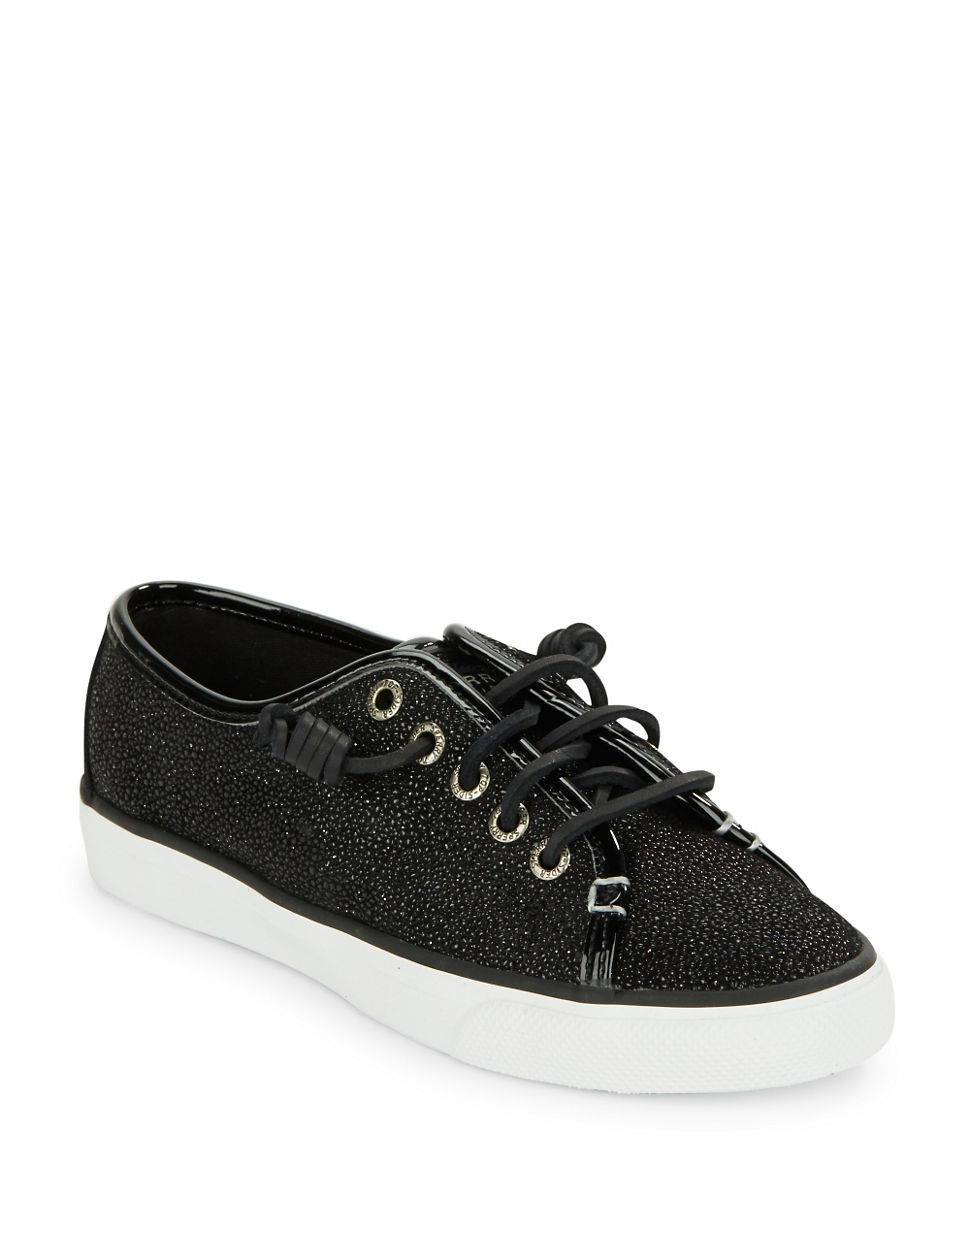 Sperry top-sider Seacoast Textured Leather Sneakers in Black - Save 25% ...